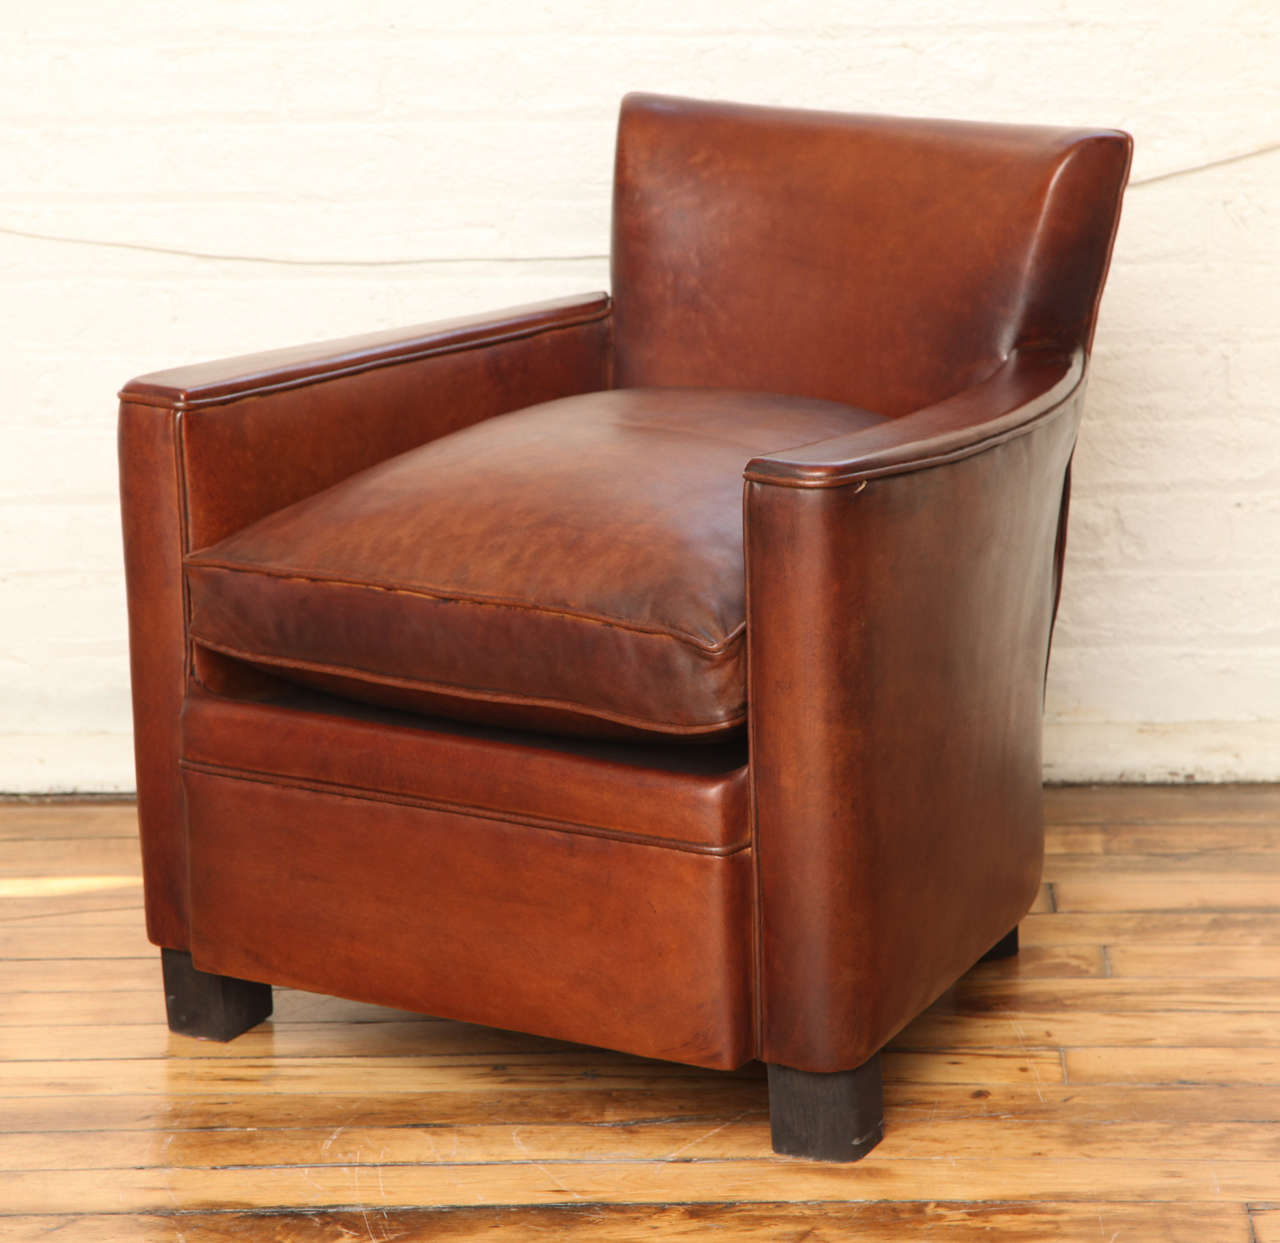 A pair of Art Deco leather club chairs.